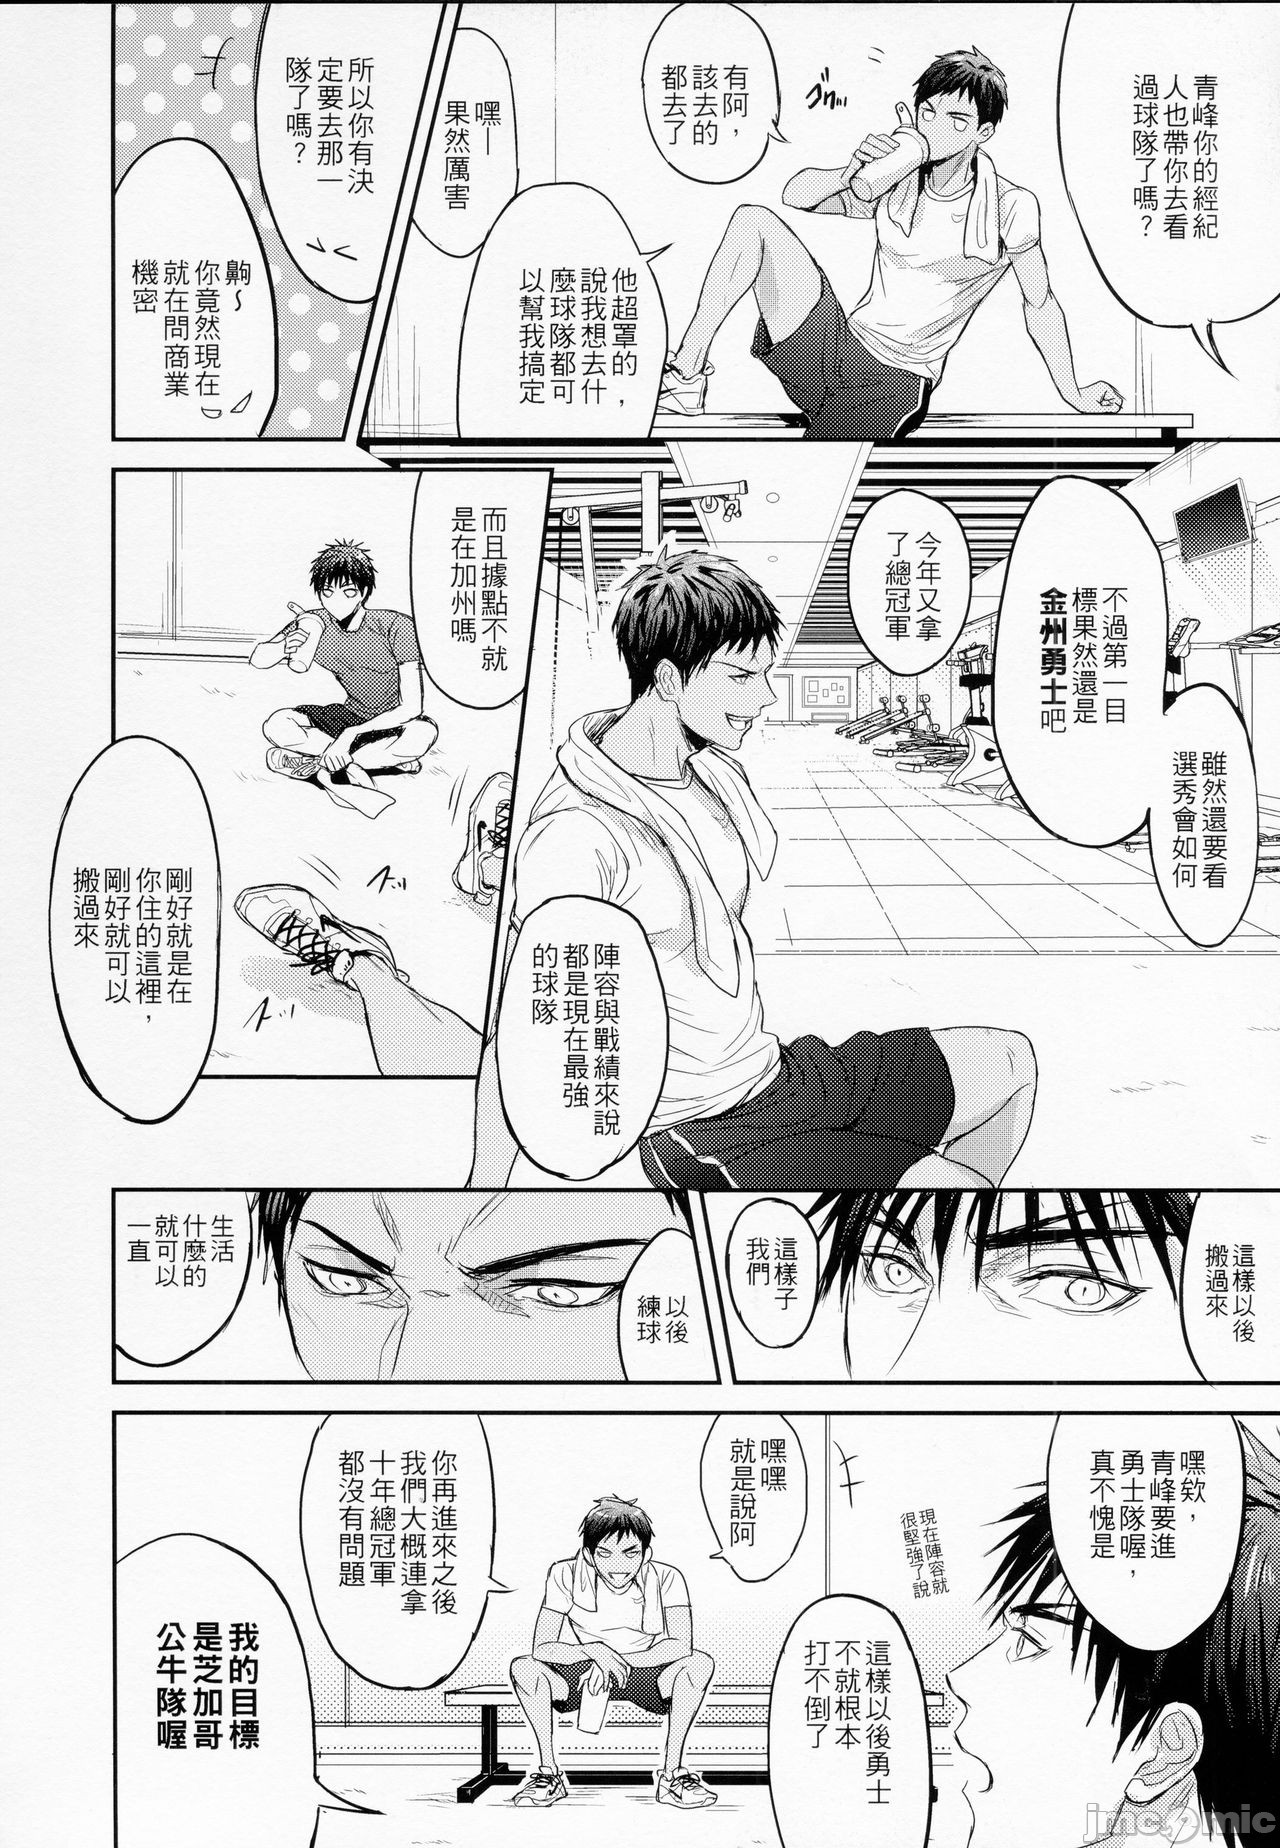 【This is how we WORK IT OUT (黒子のバスケ)[耽美]】漫画-（第1话）章节漫画下拉式图片-7.jpg